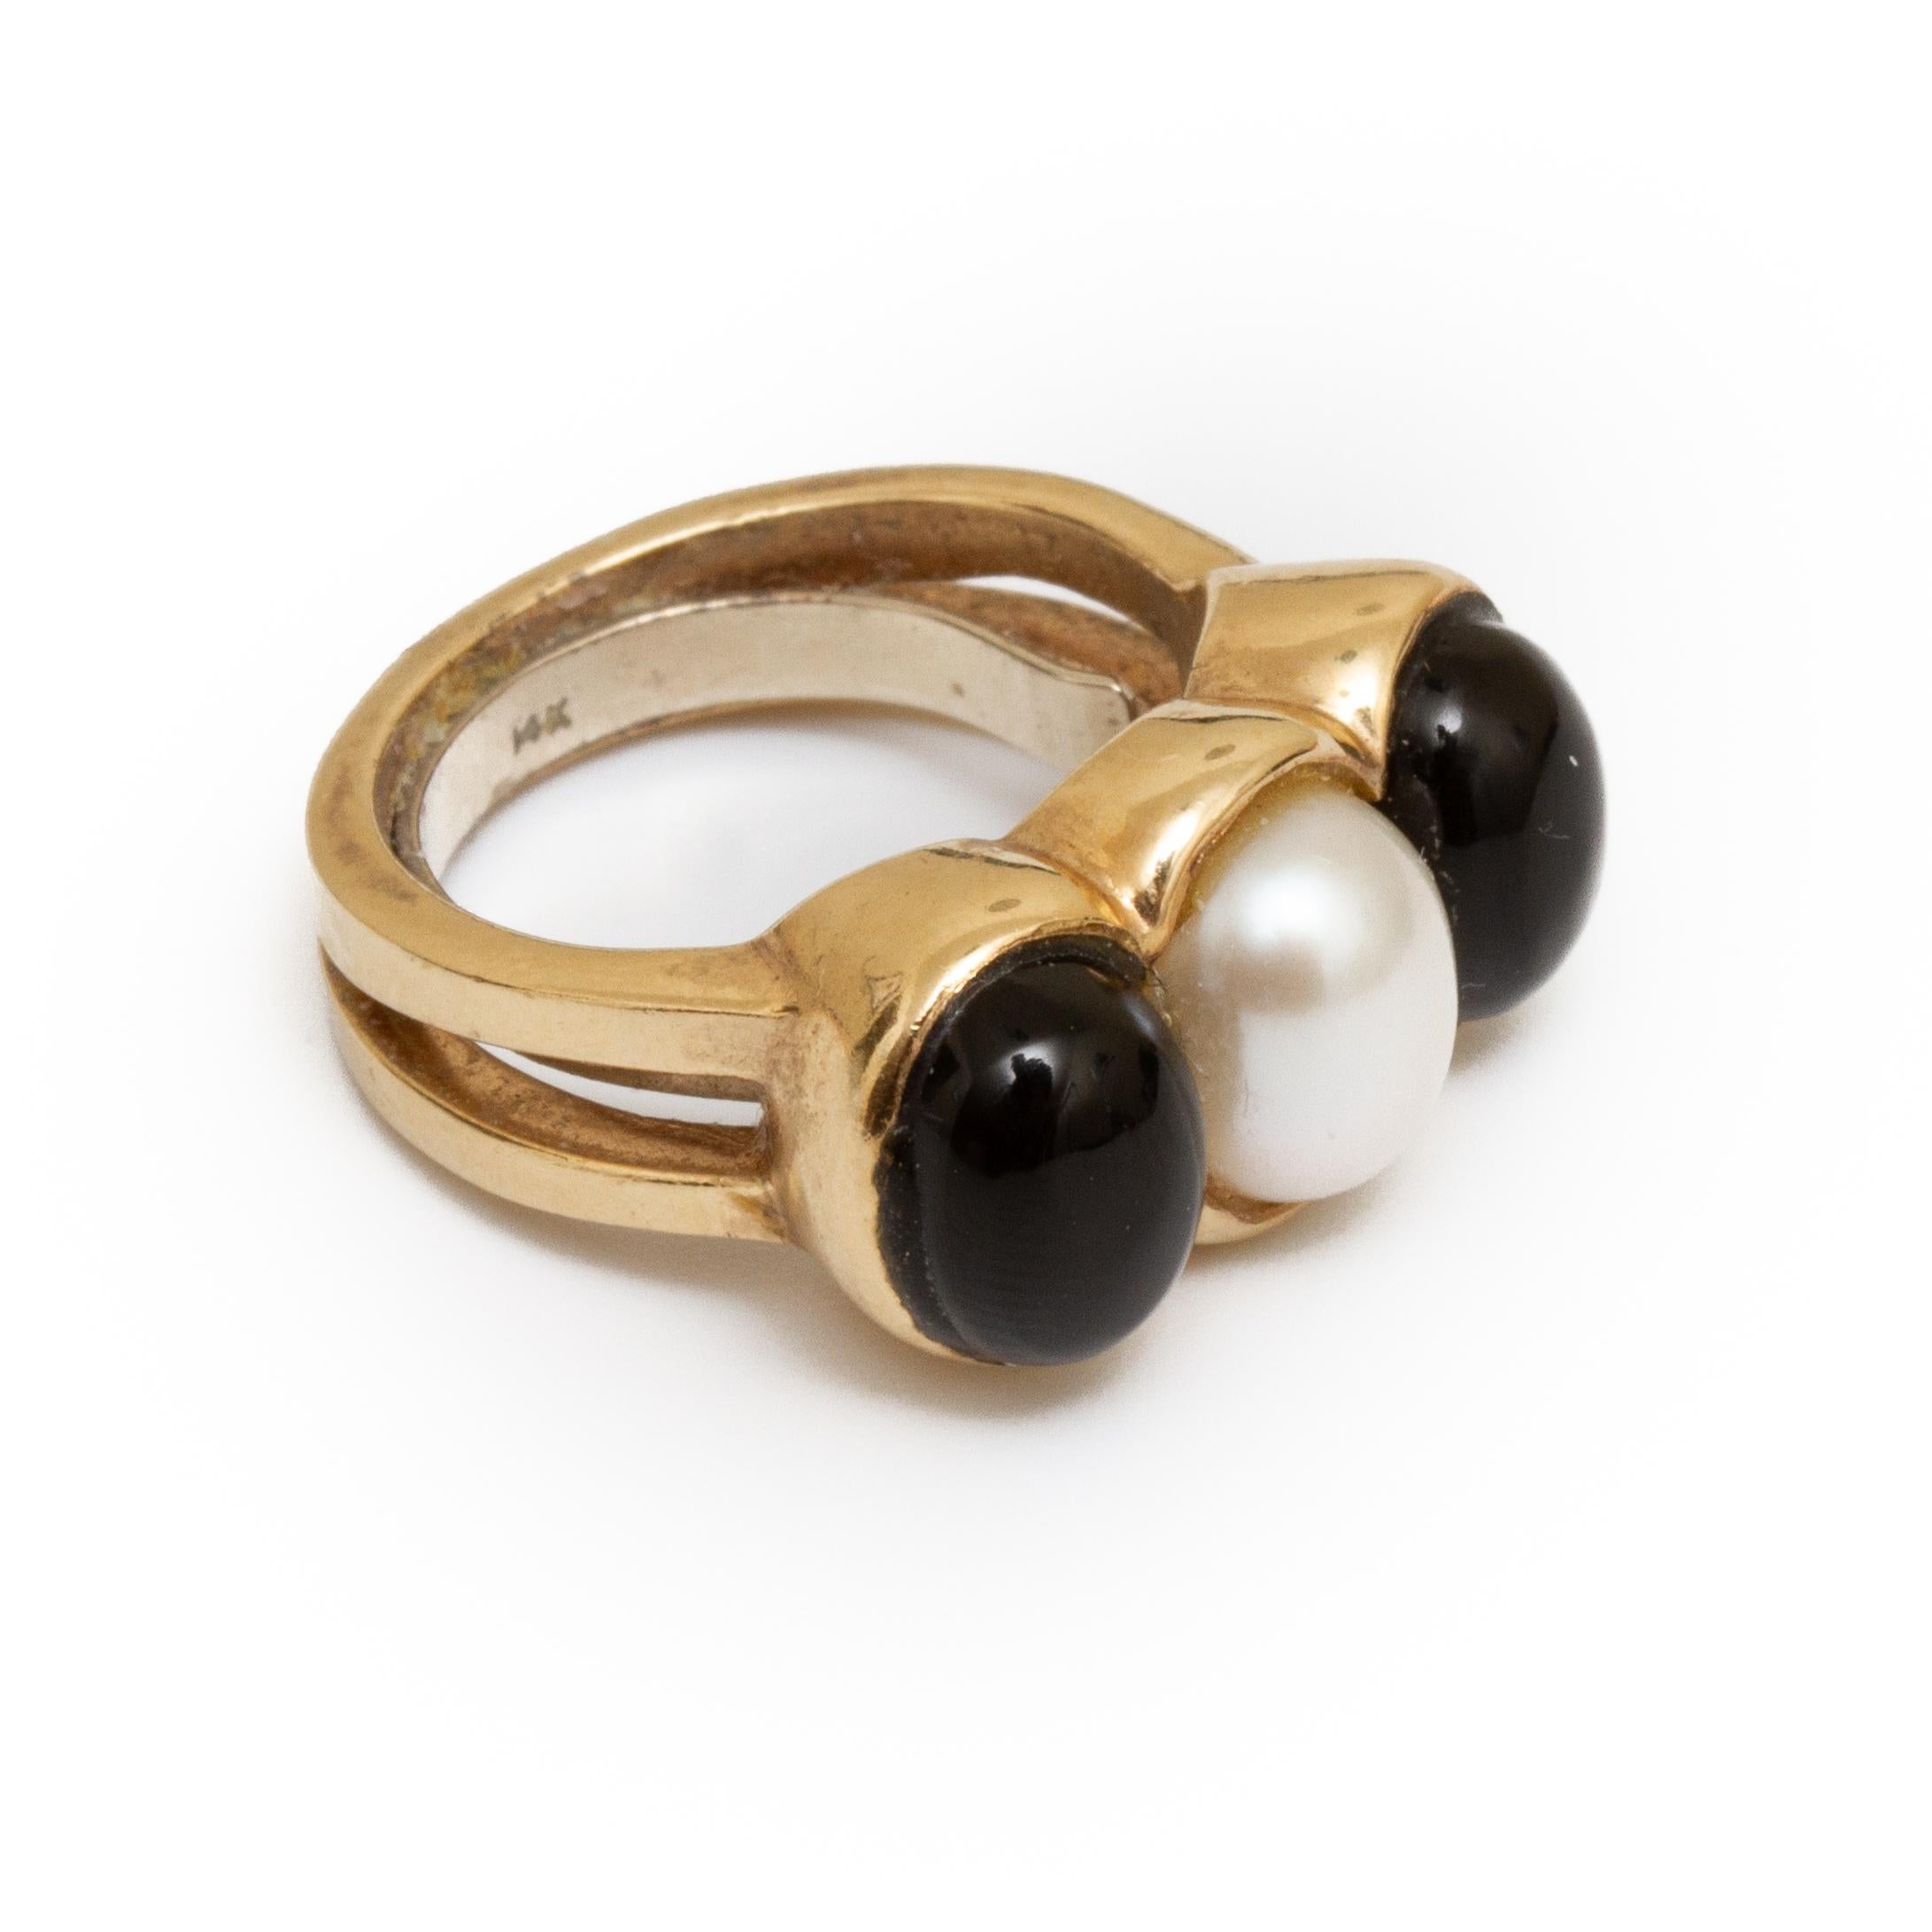 14k gold ring cabochon pearl set between two cabochon set black onyx approx. size 6 From the Broussard estate noted jewelry collection Park Avenue New York